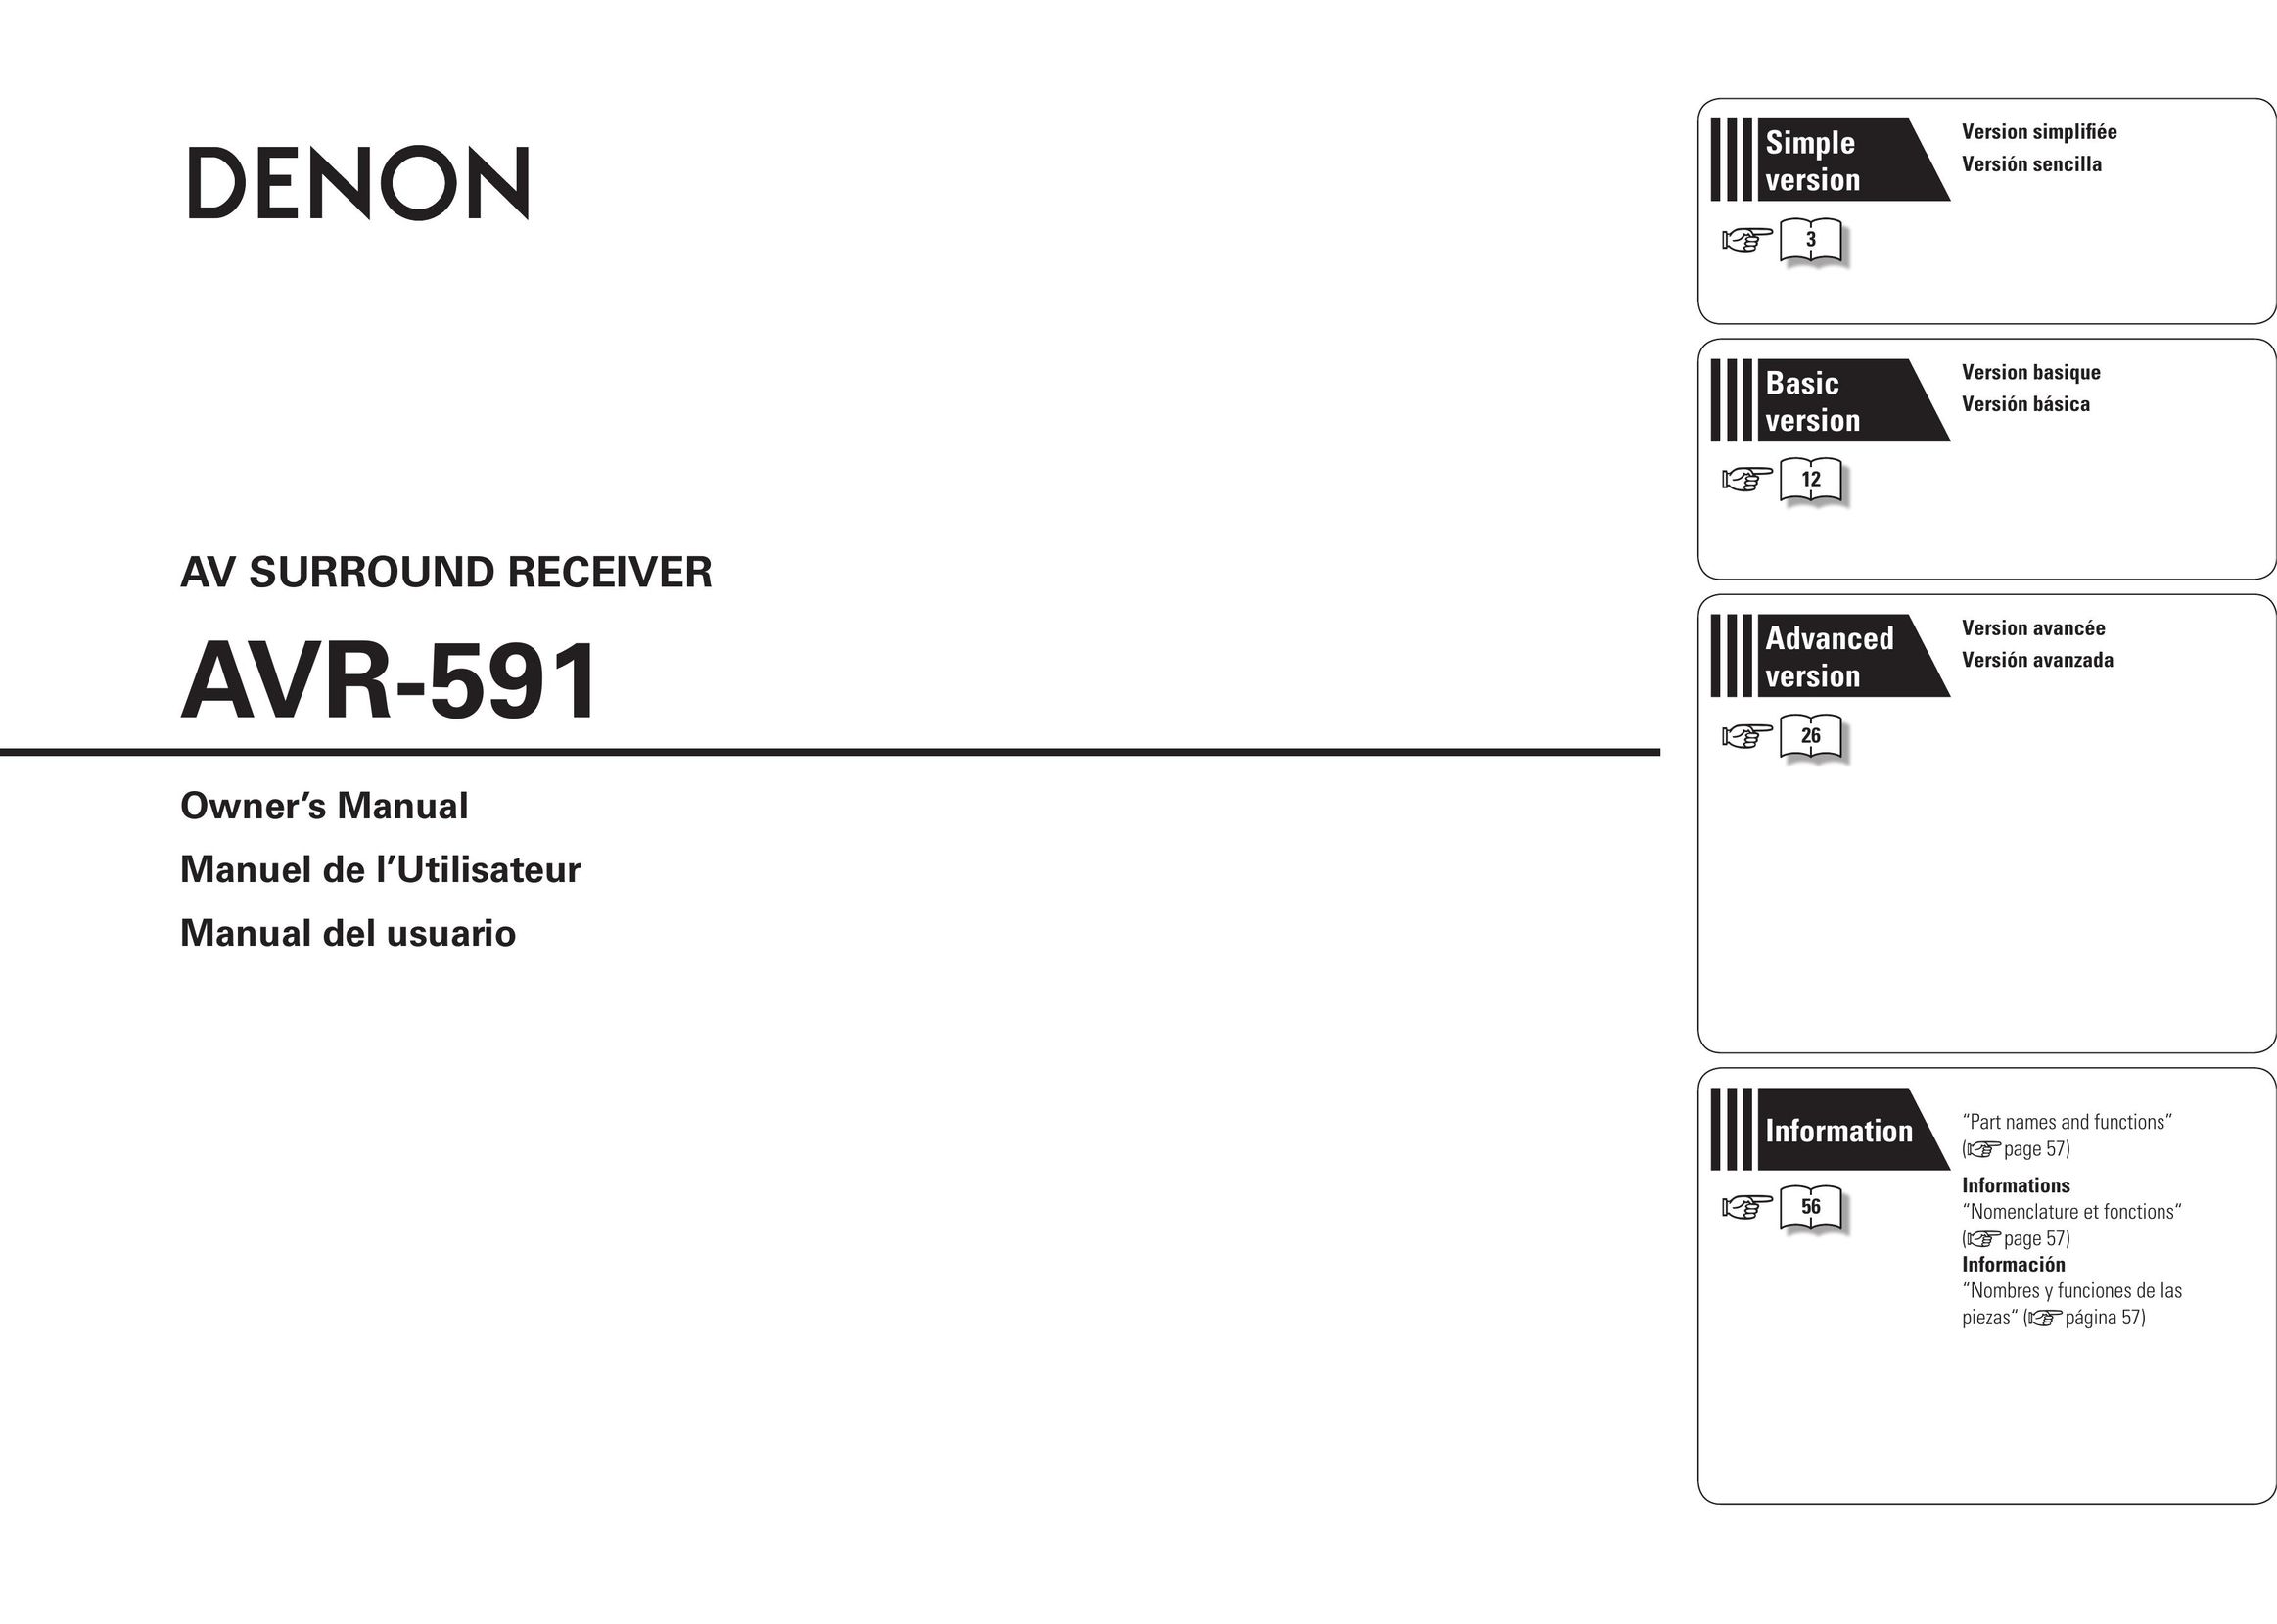 Denon AVR-591 Home Theater System User Manual